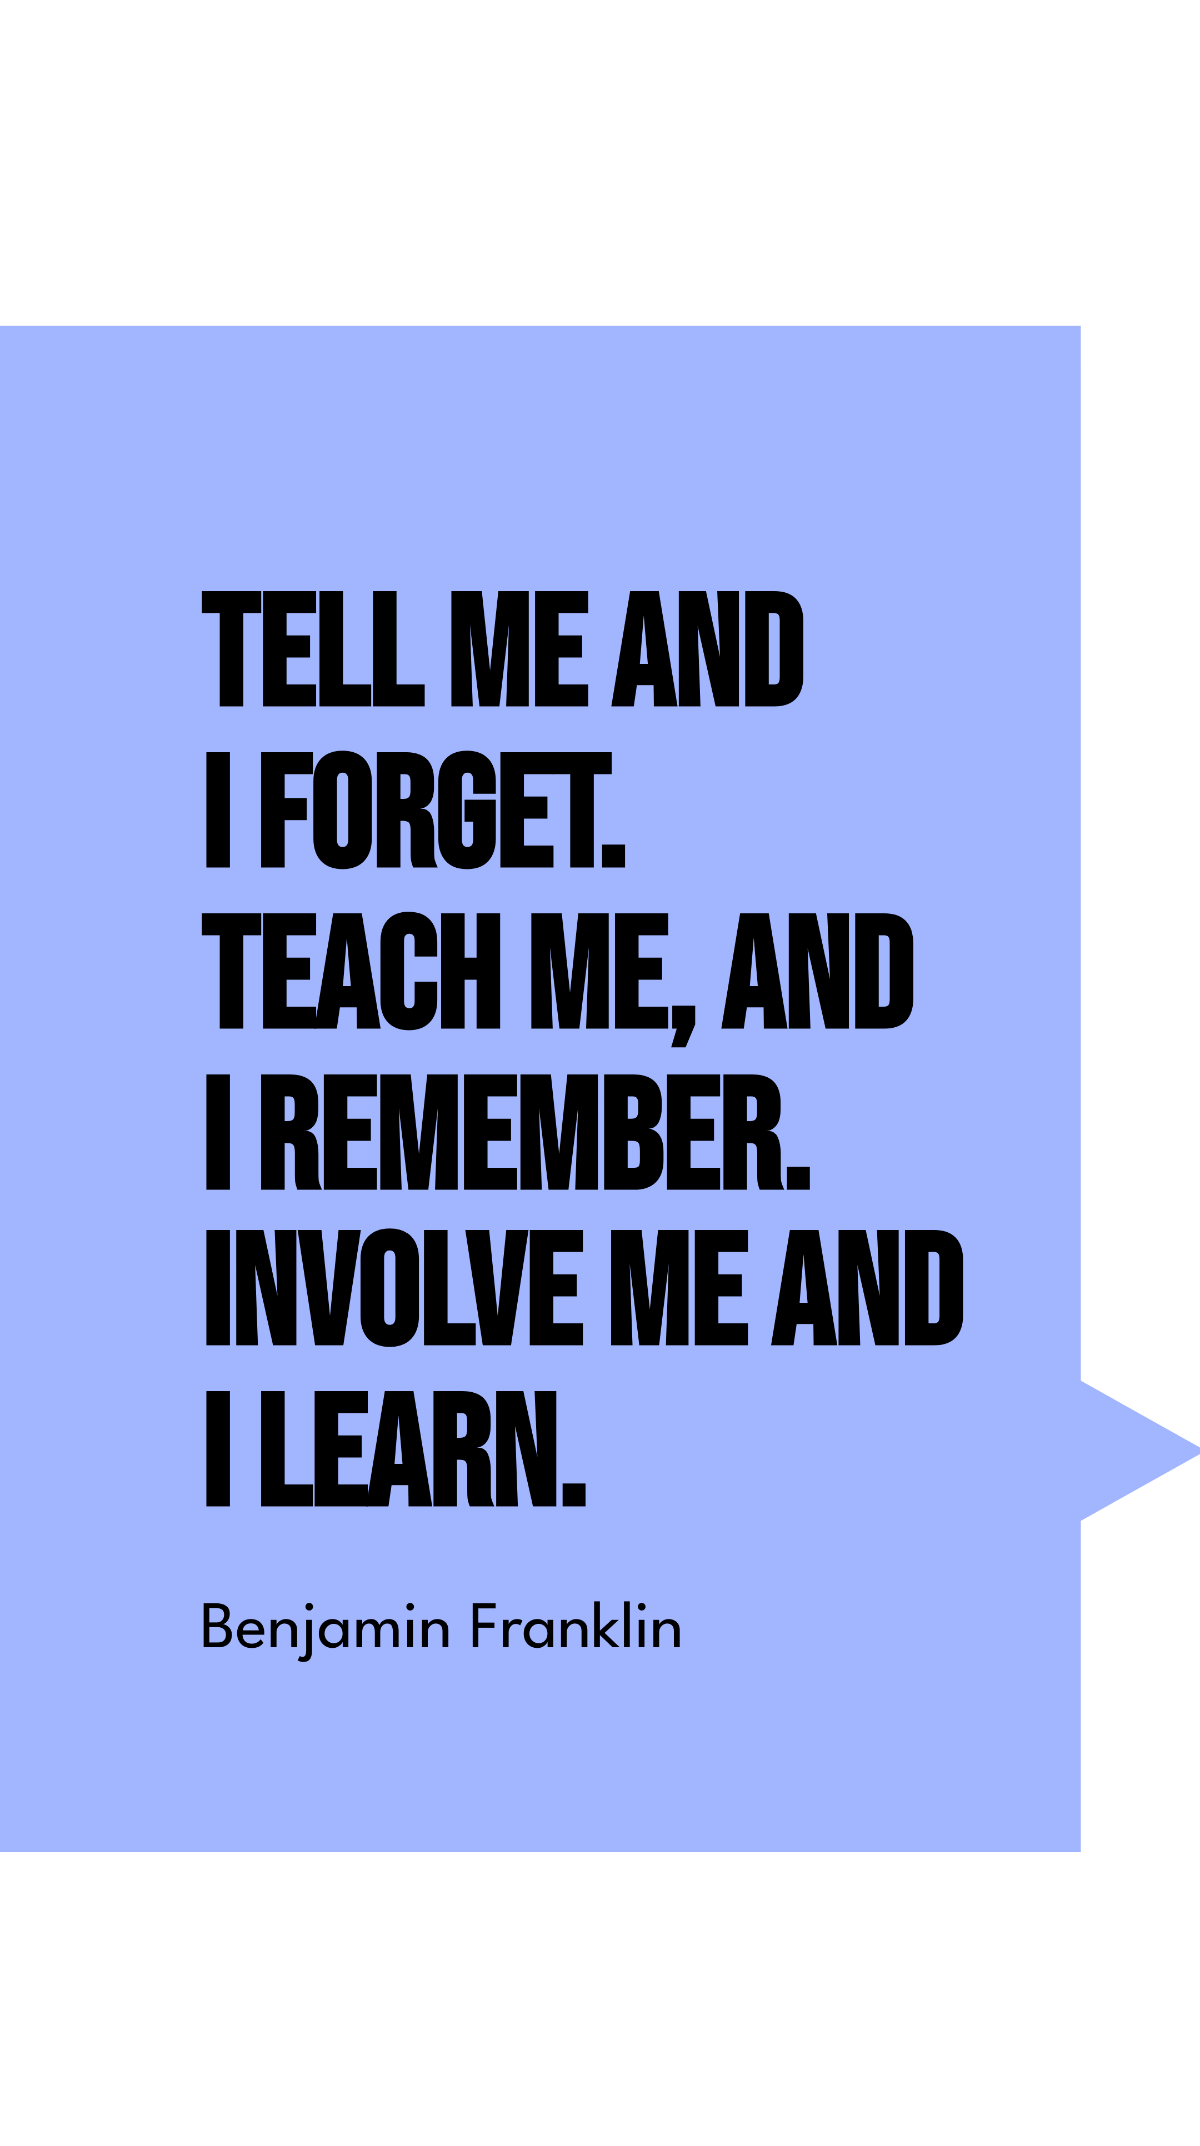 Free Benjamin Franklin - Tell me and I forget. Teach me, and I remember. Involve me and I learn. Template